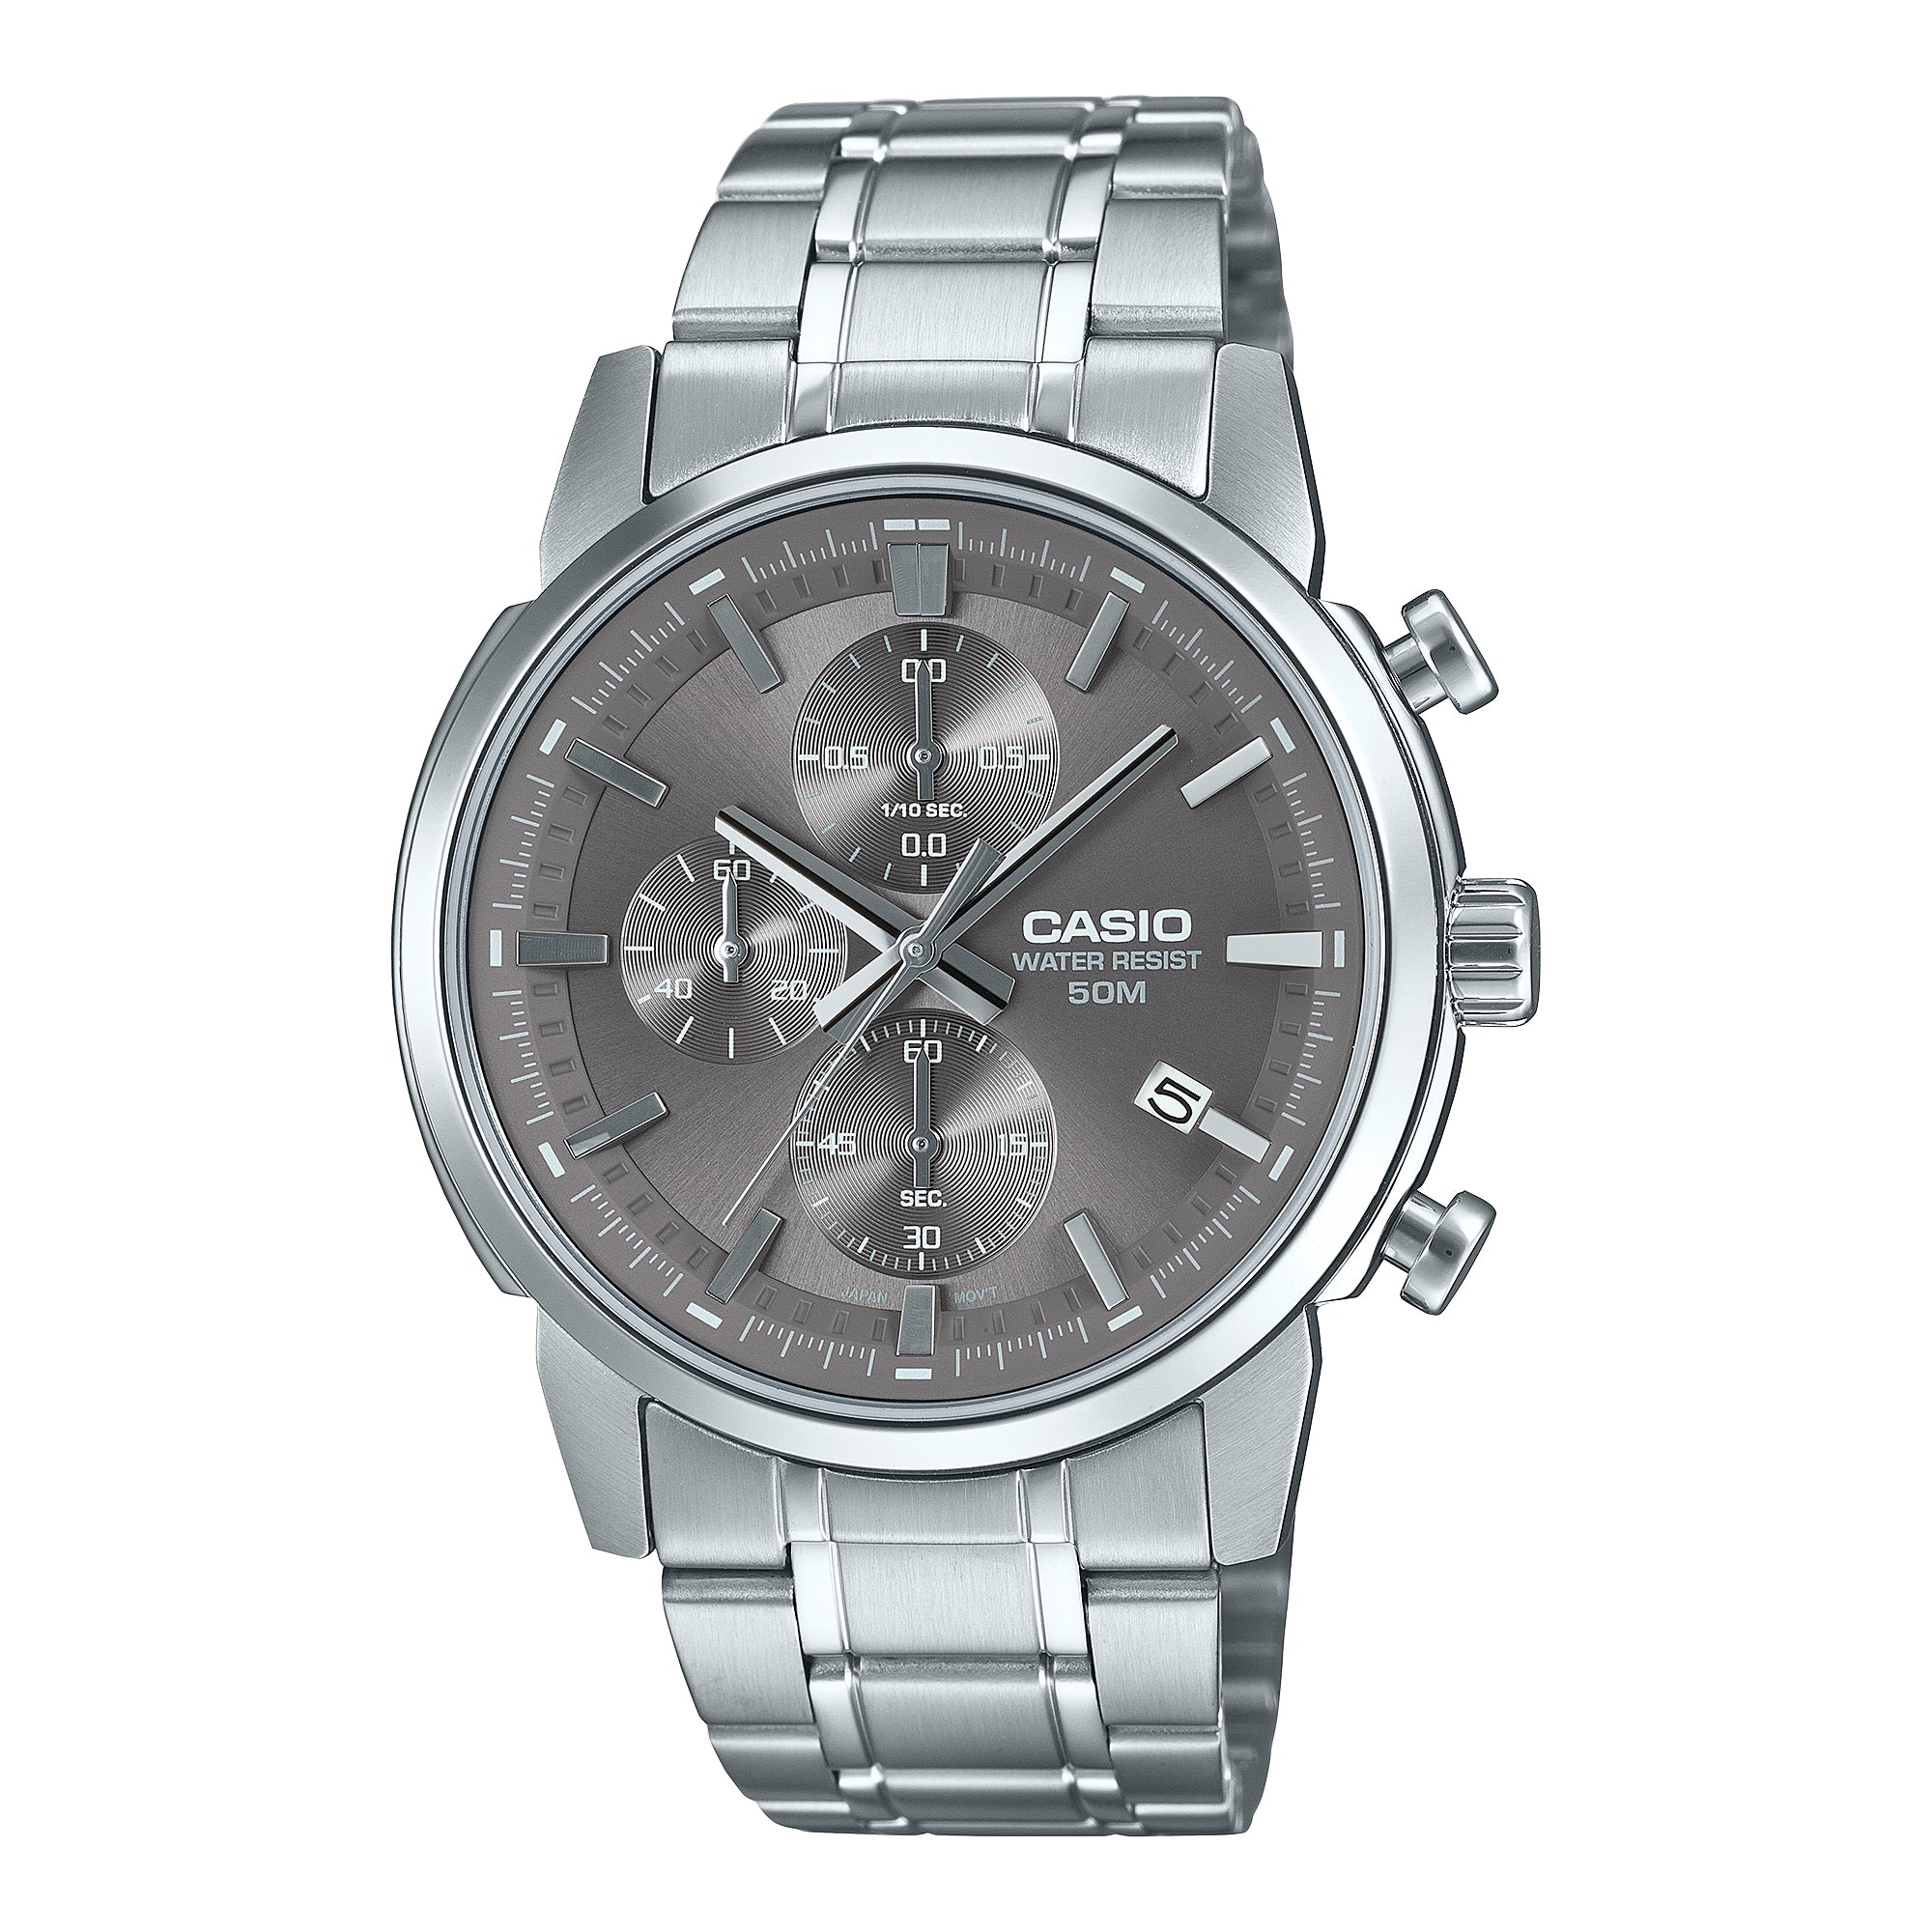 Casio Men's Analog Sporty Chronograph Stainless Steel Band Watch MTPE510D-8A MTP-E510D-8A